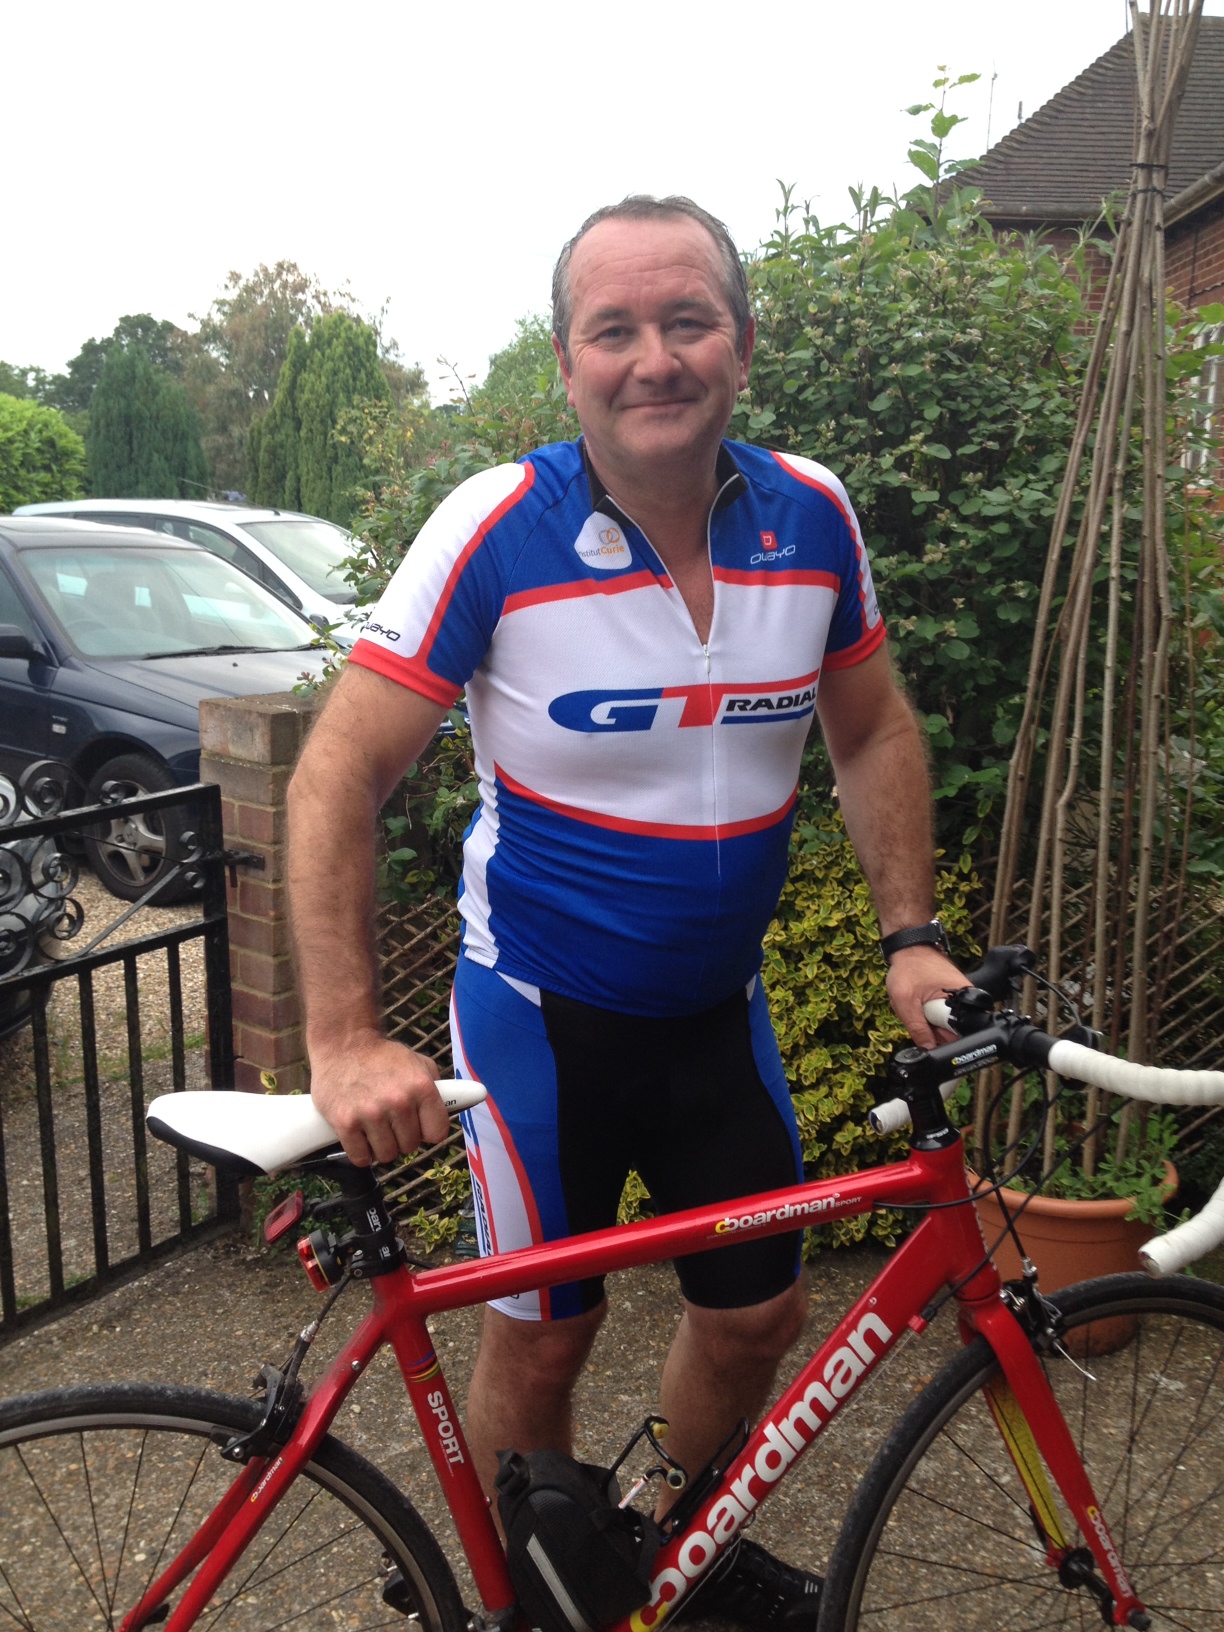 Brian McDermott, country manager UK for Giti Tire, cycling charity